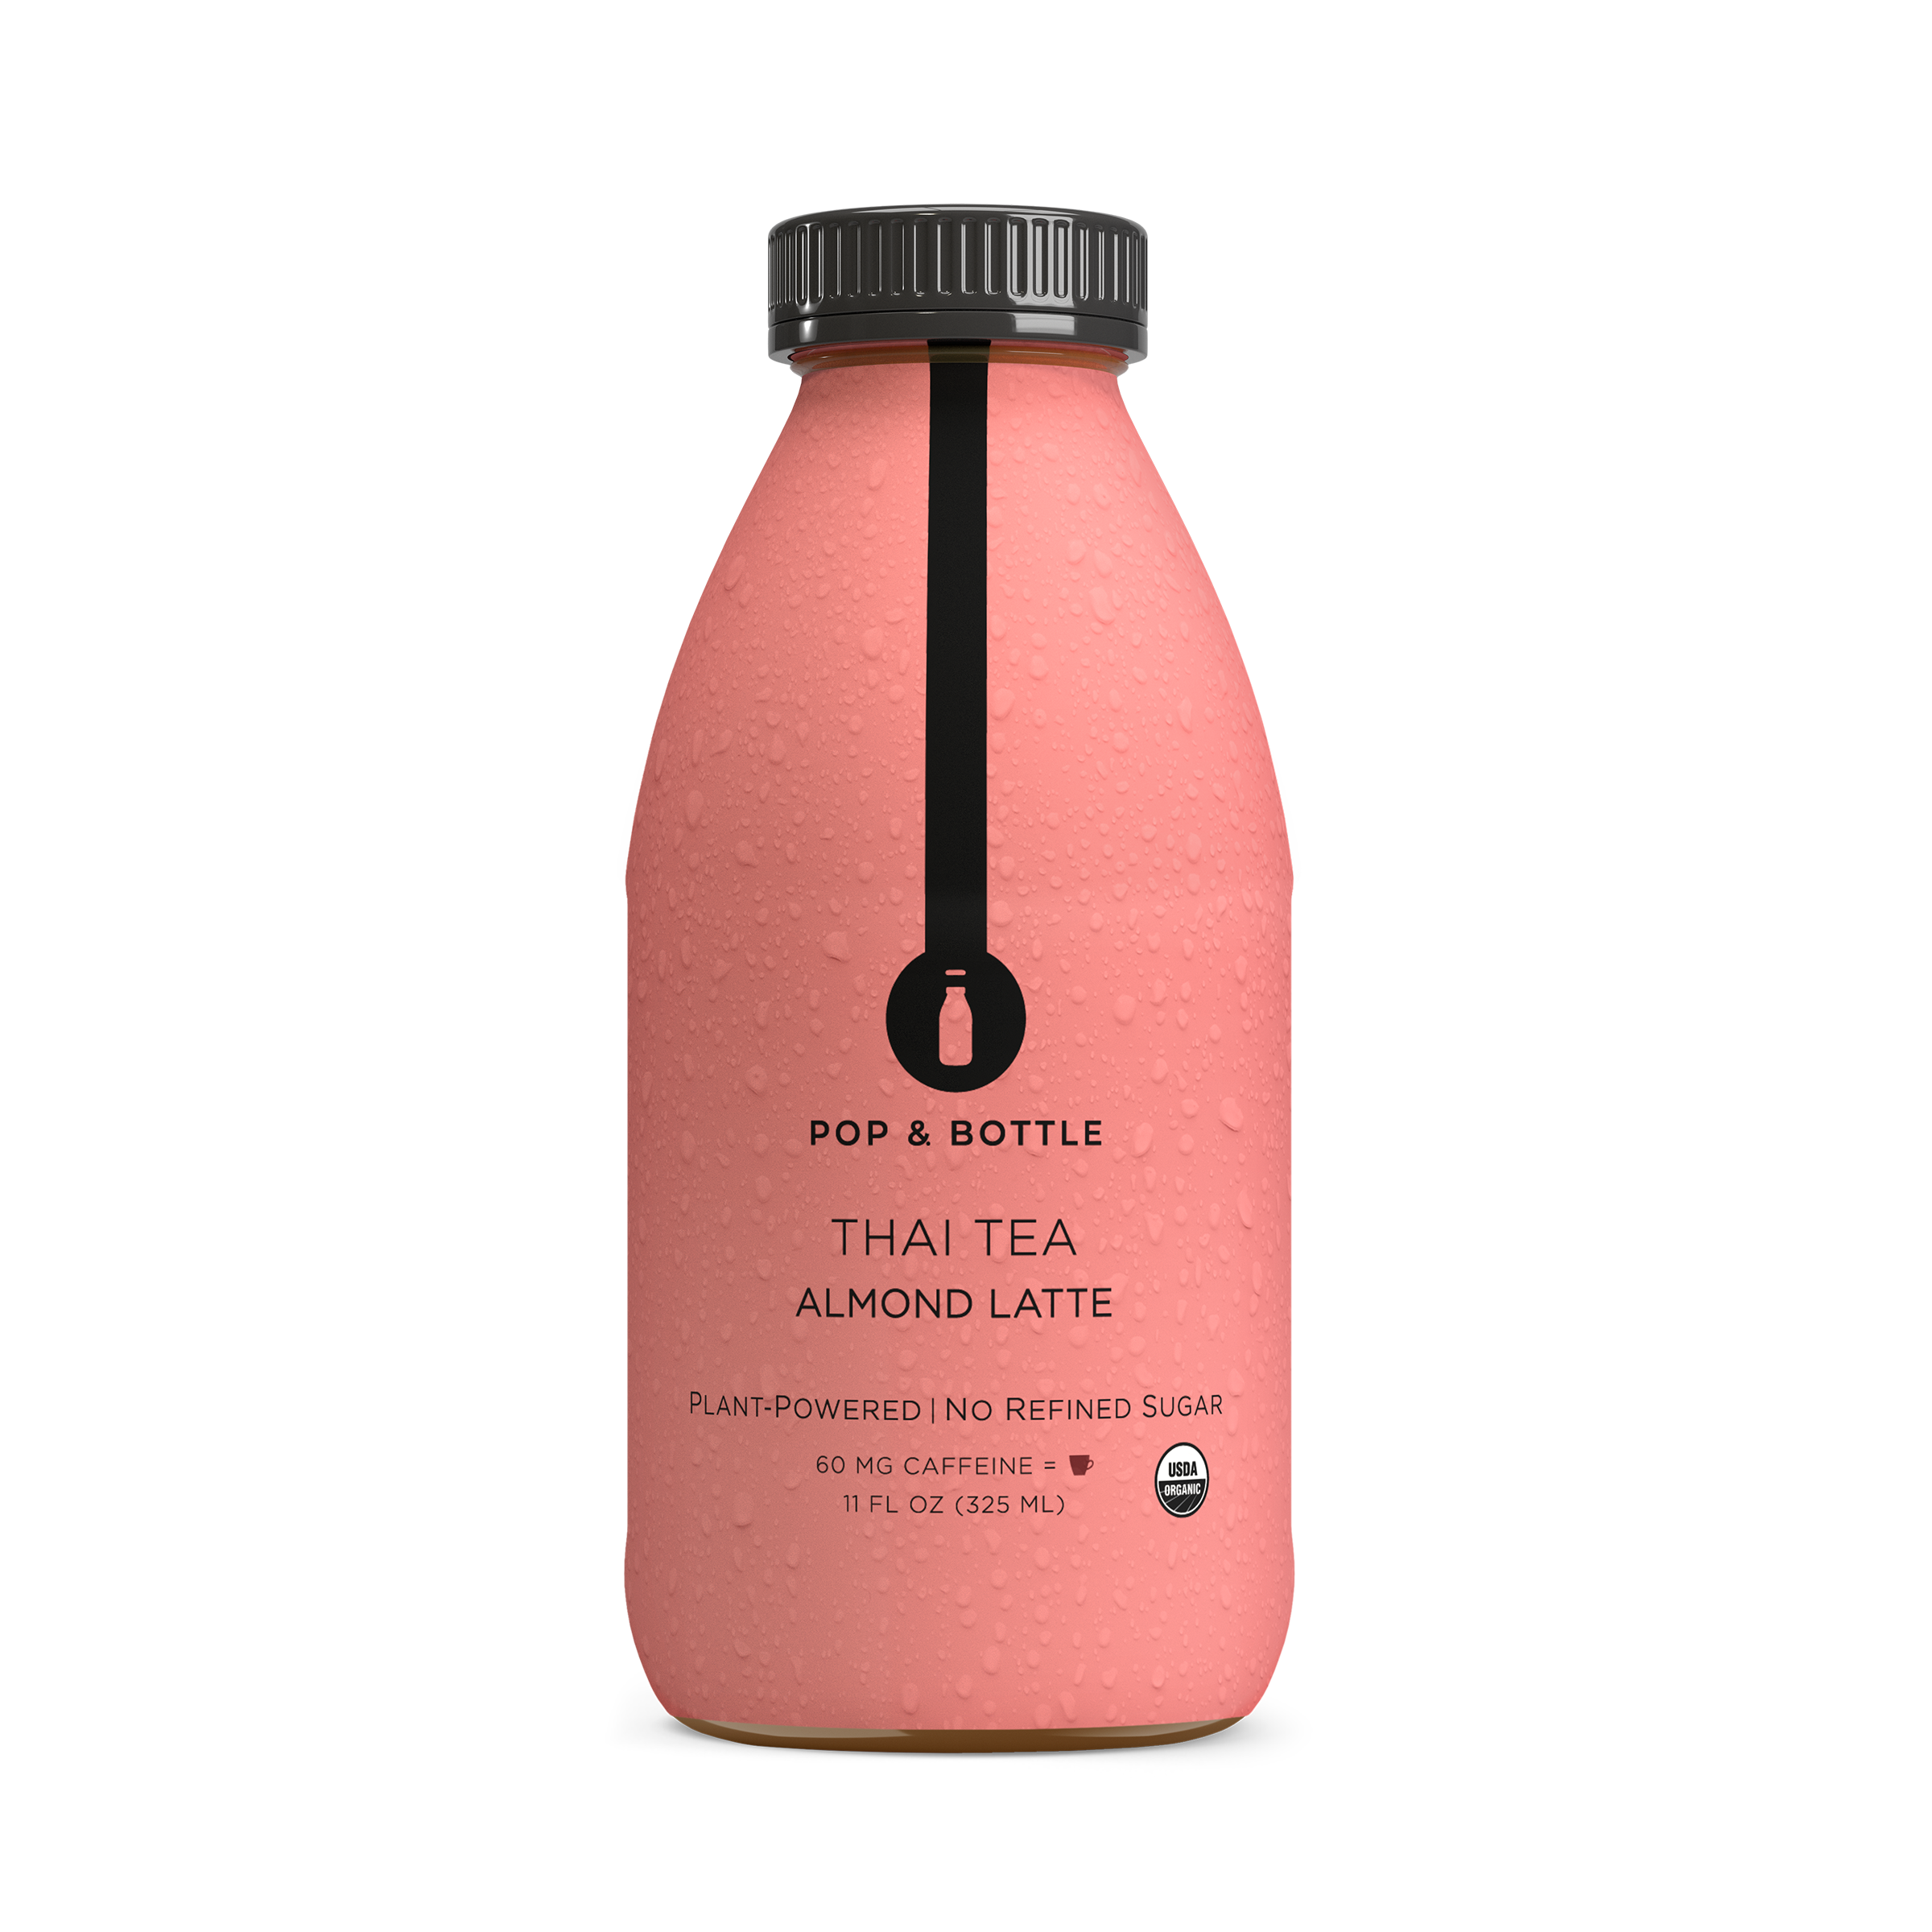 Plant-based coffee & tea brand Pop & Bottle expands product line